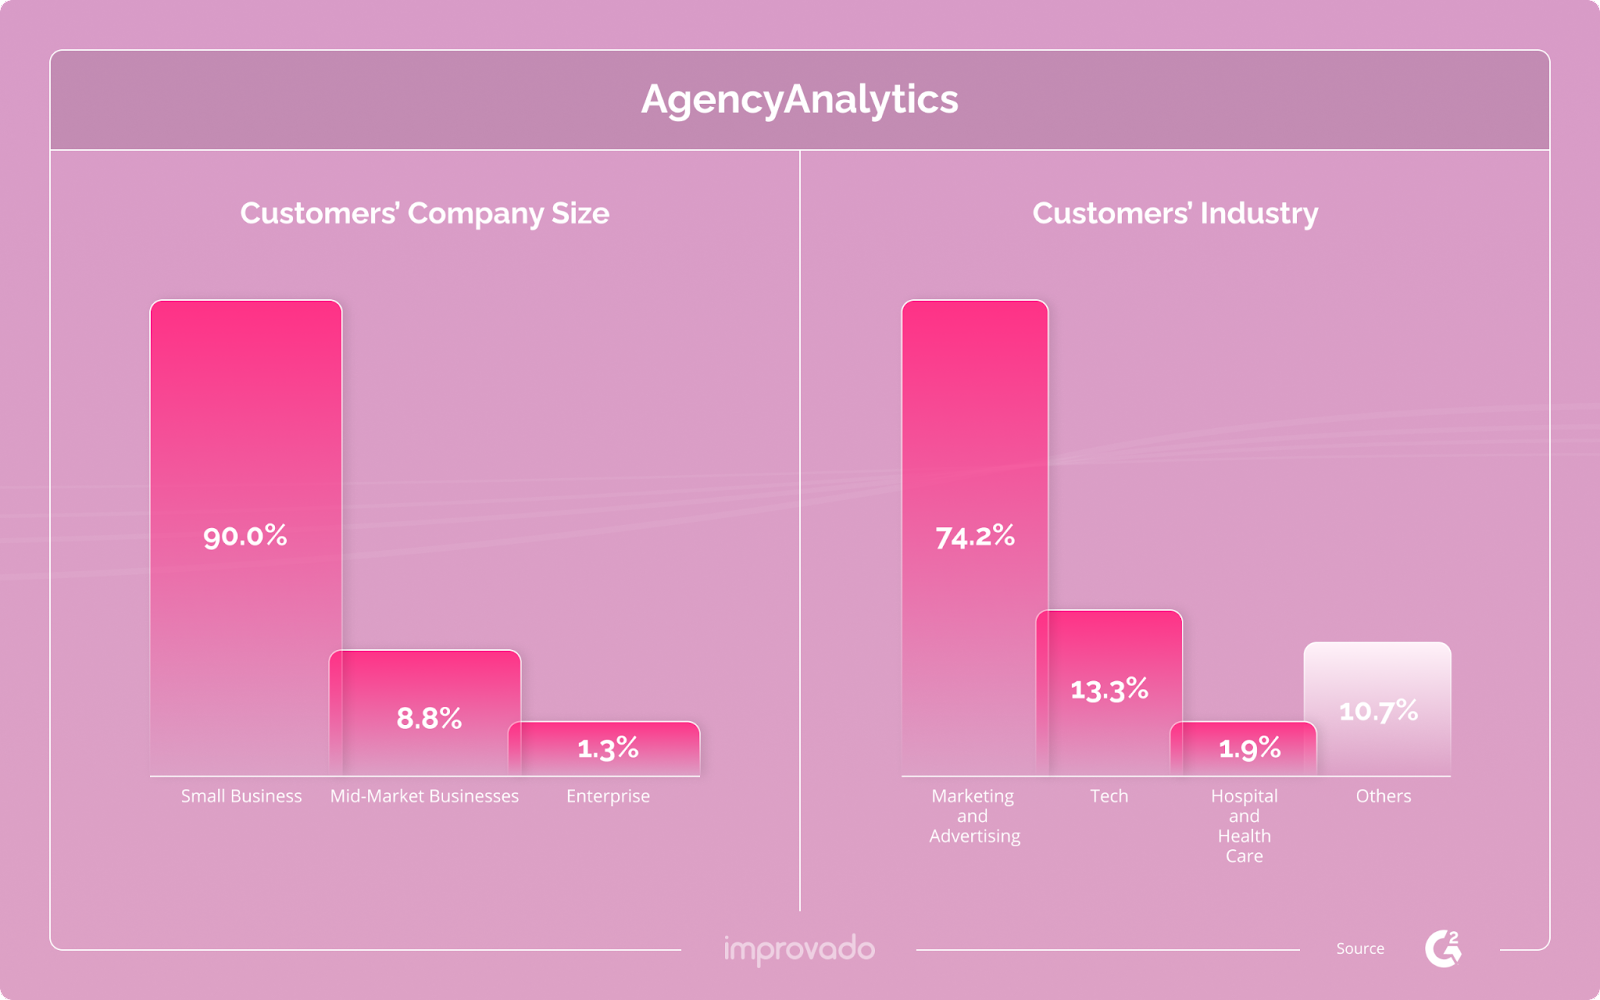 AgencyAnalytics isn't powered for mid-market brands and enterprise companies.